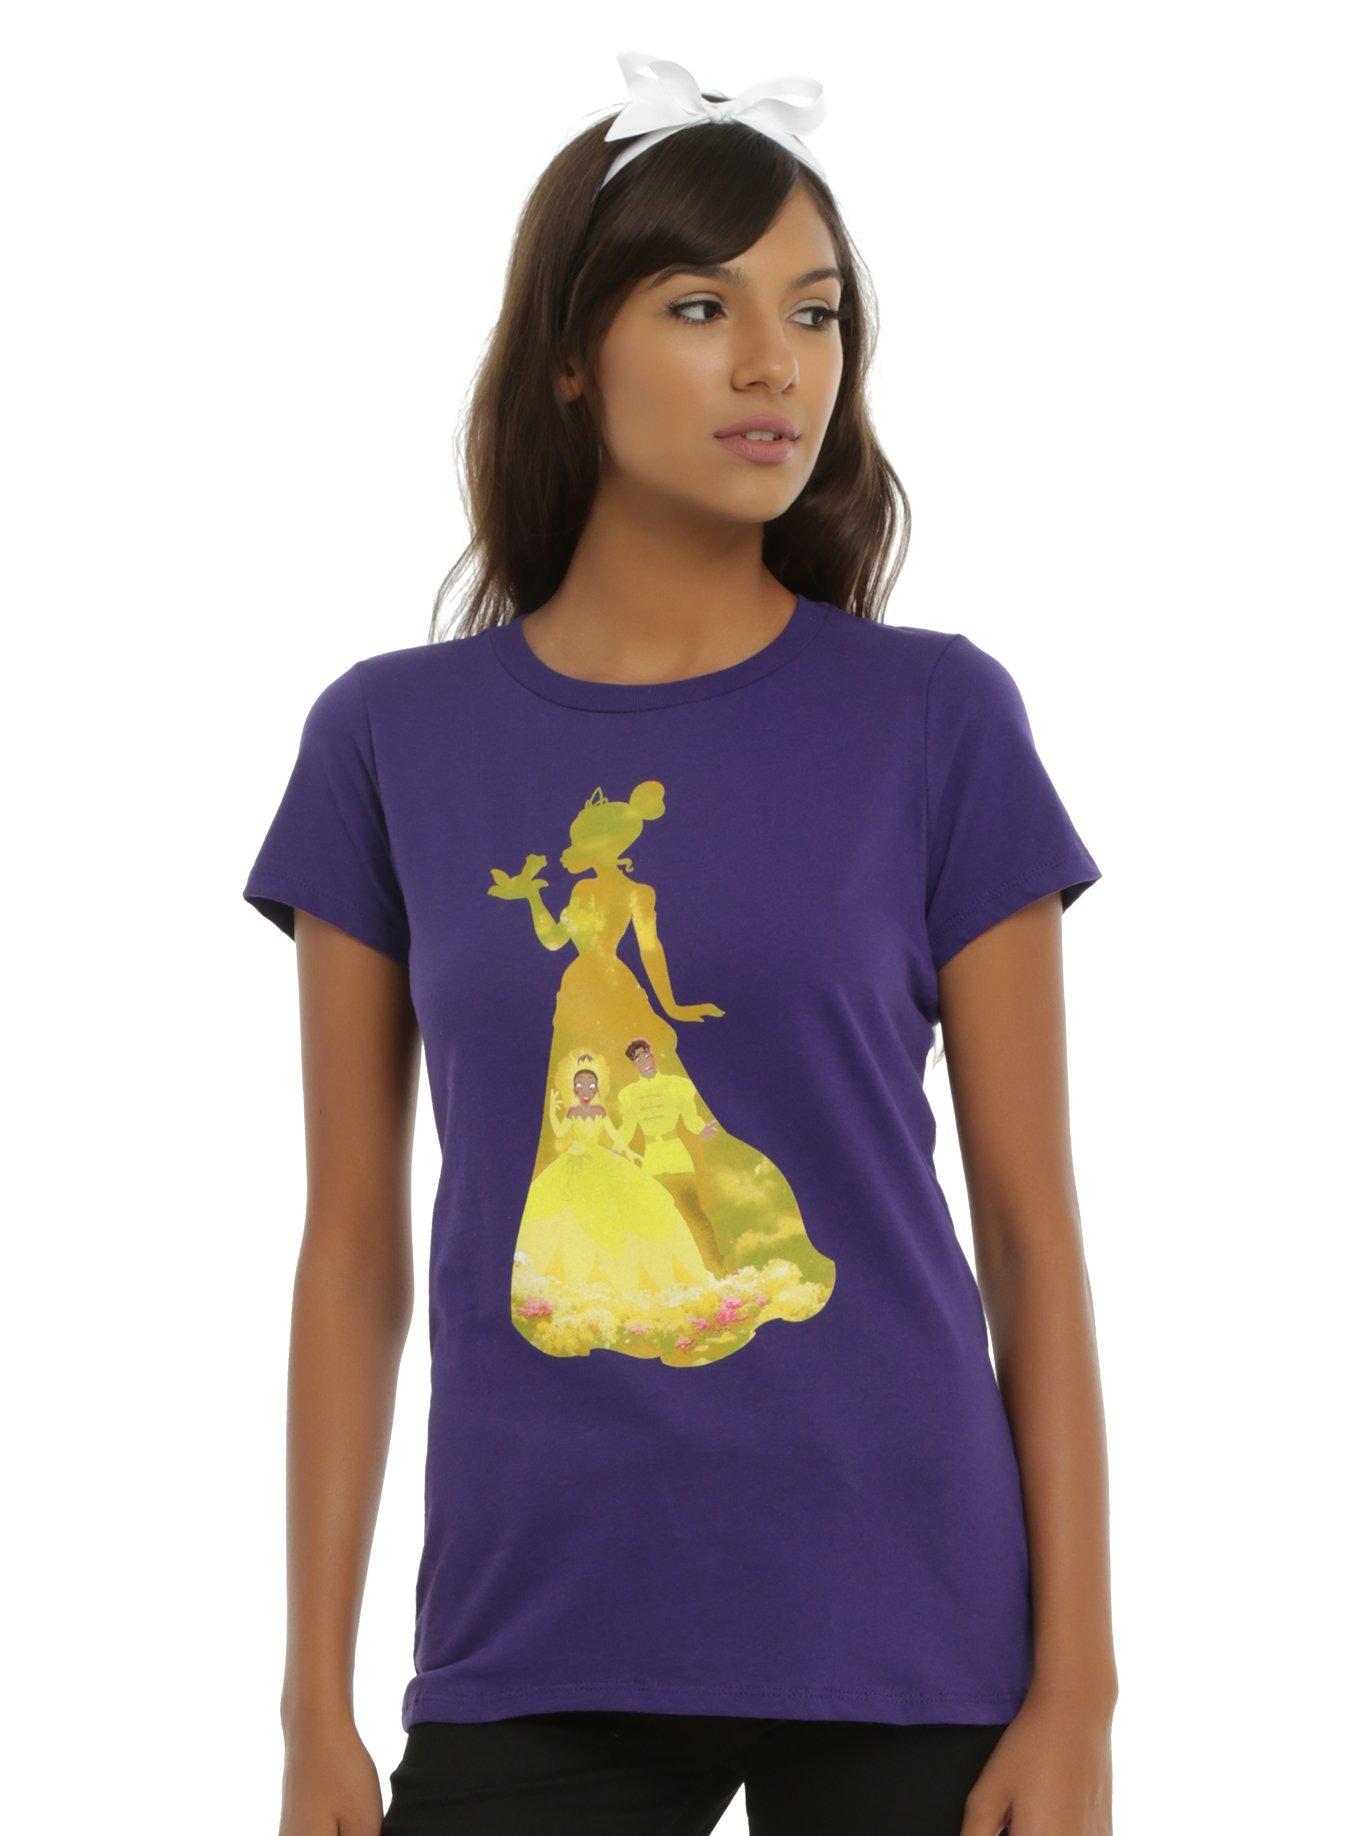 Disney The Princess And The Frog Tiana Silhouette Girls T-Shirt, PURPLE, hi-res